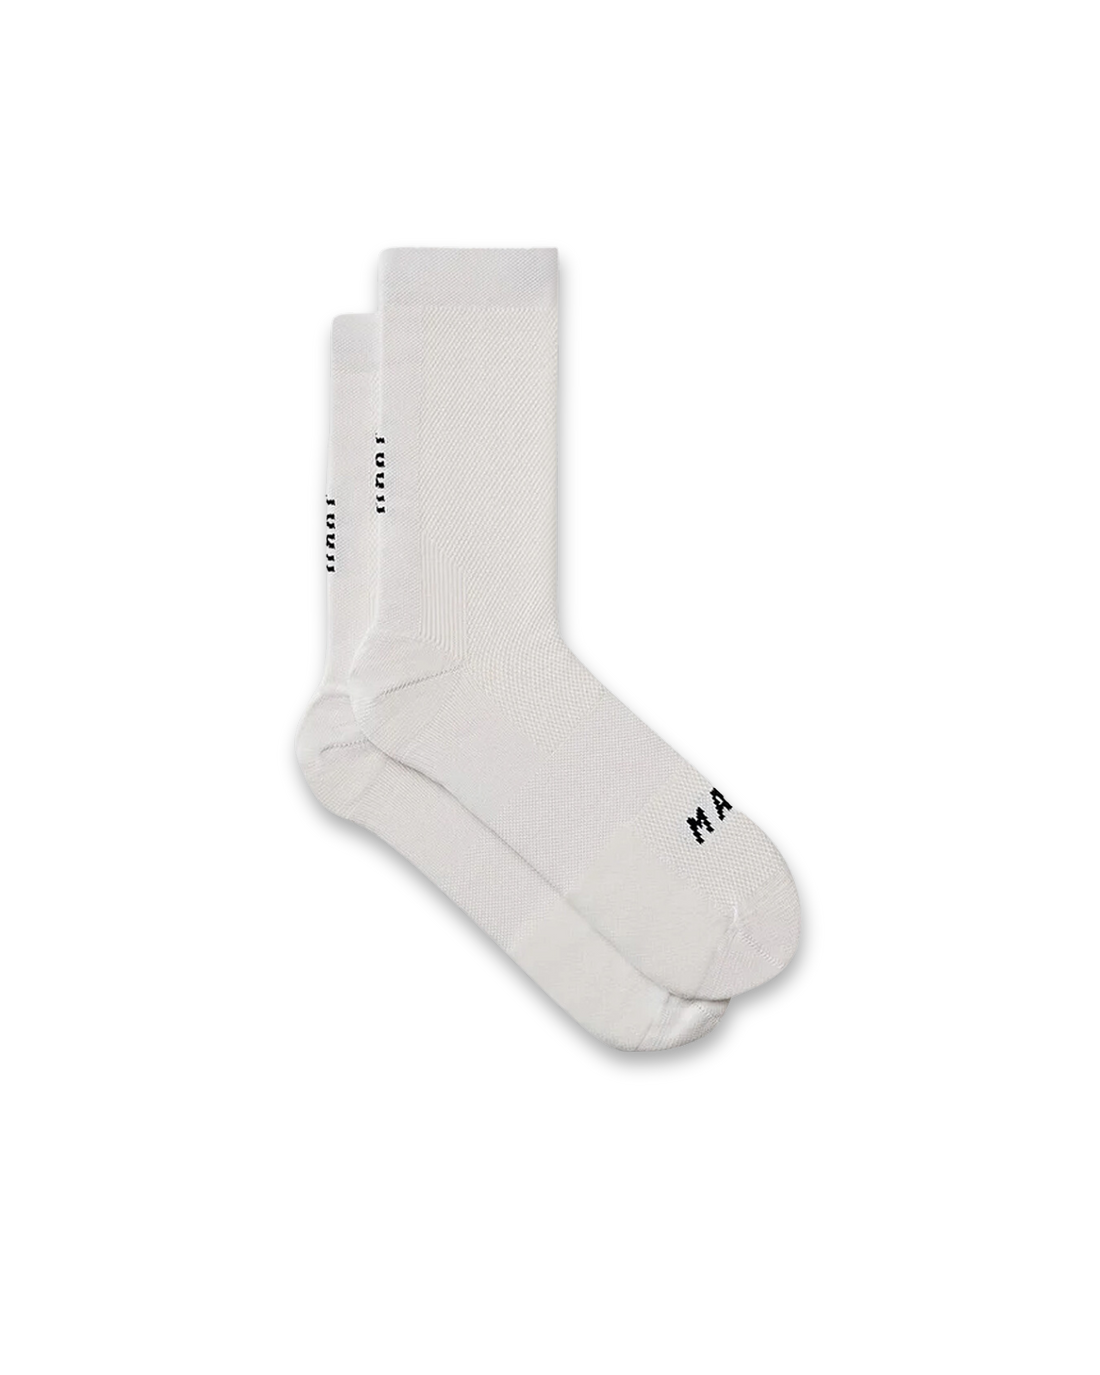 MAAP Division Sock - Antarctica exclusive at Enroute.cc